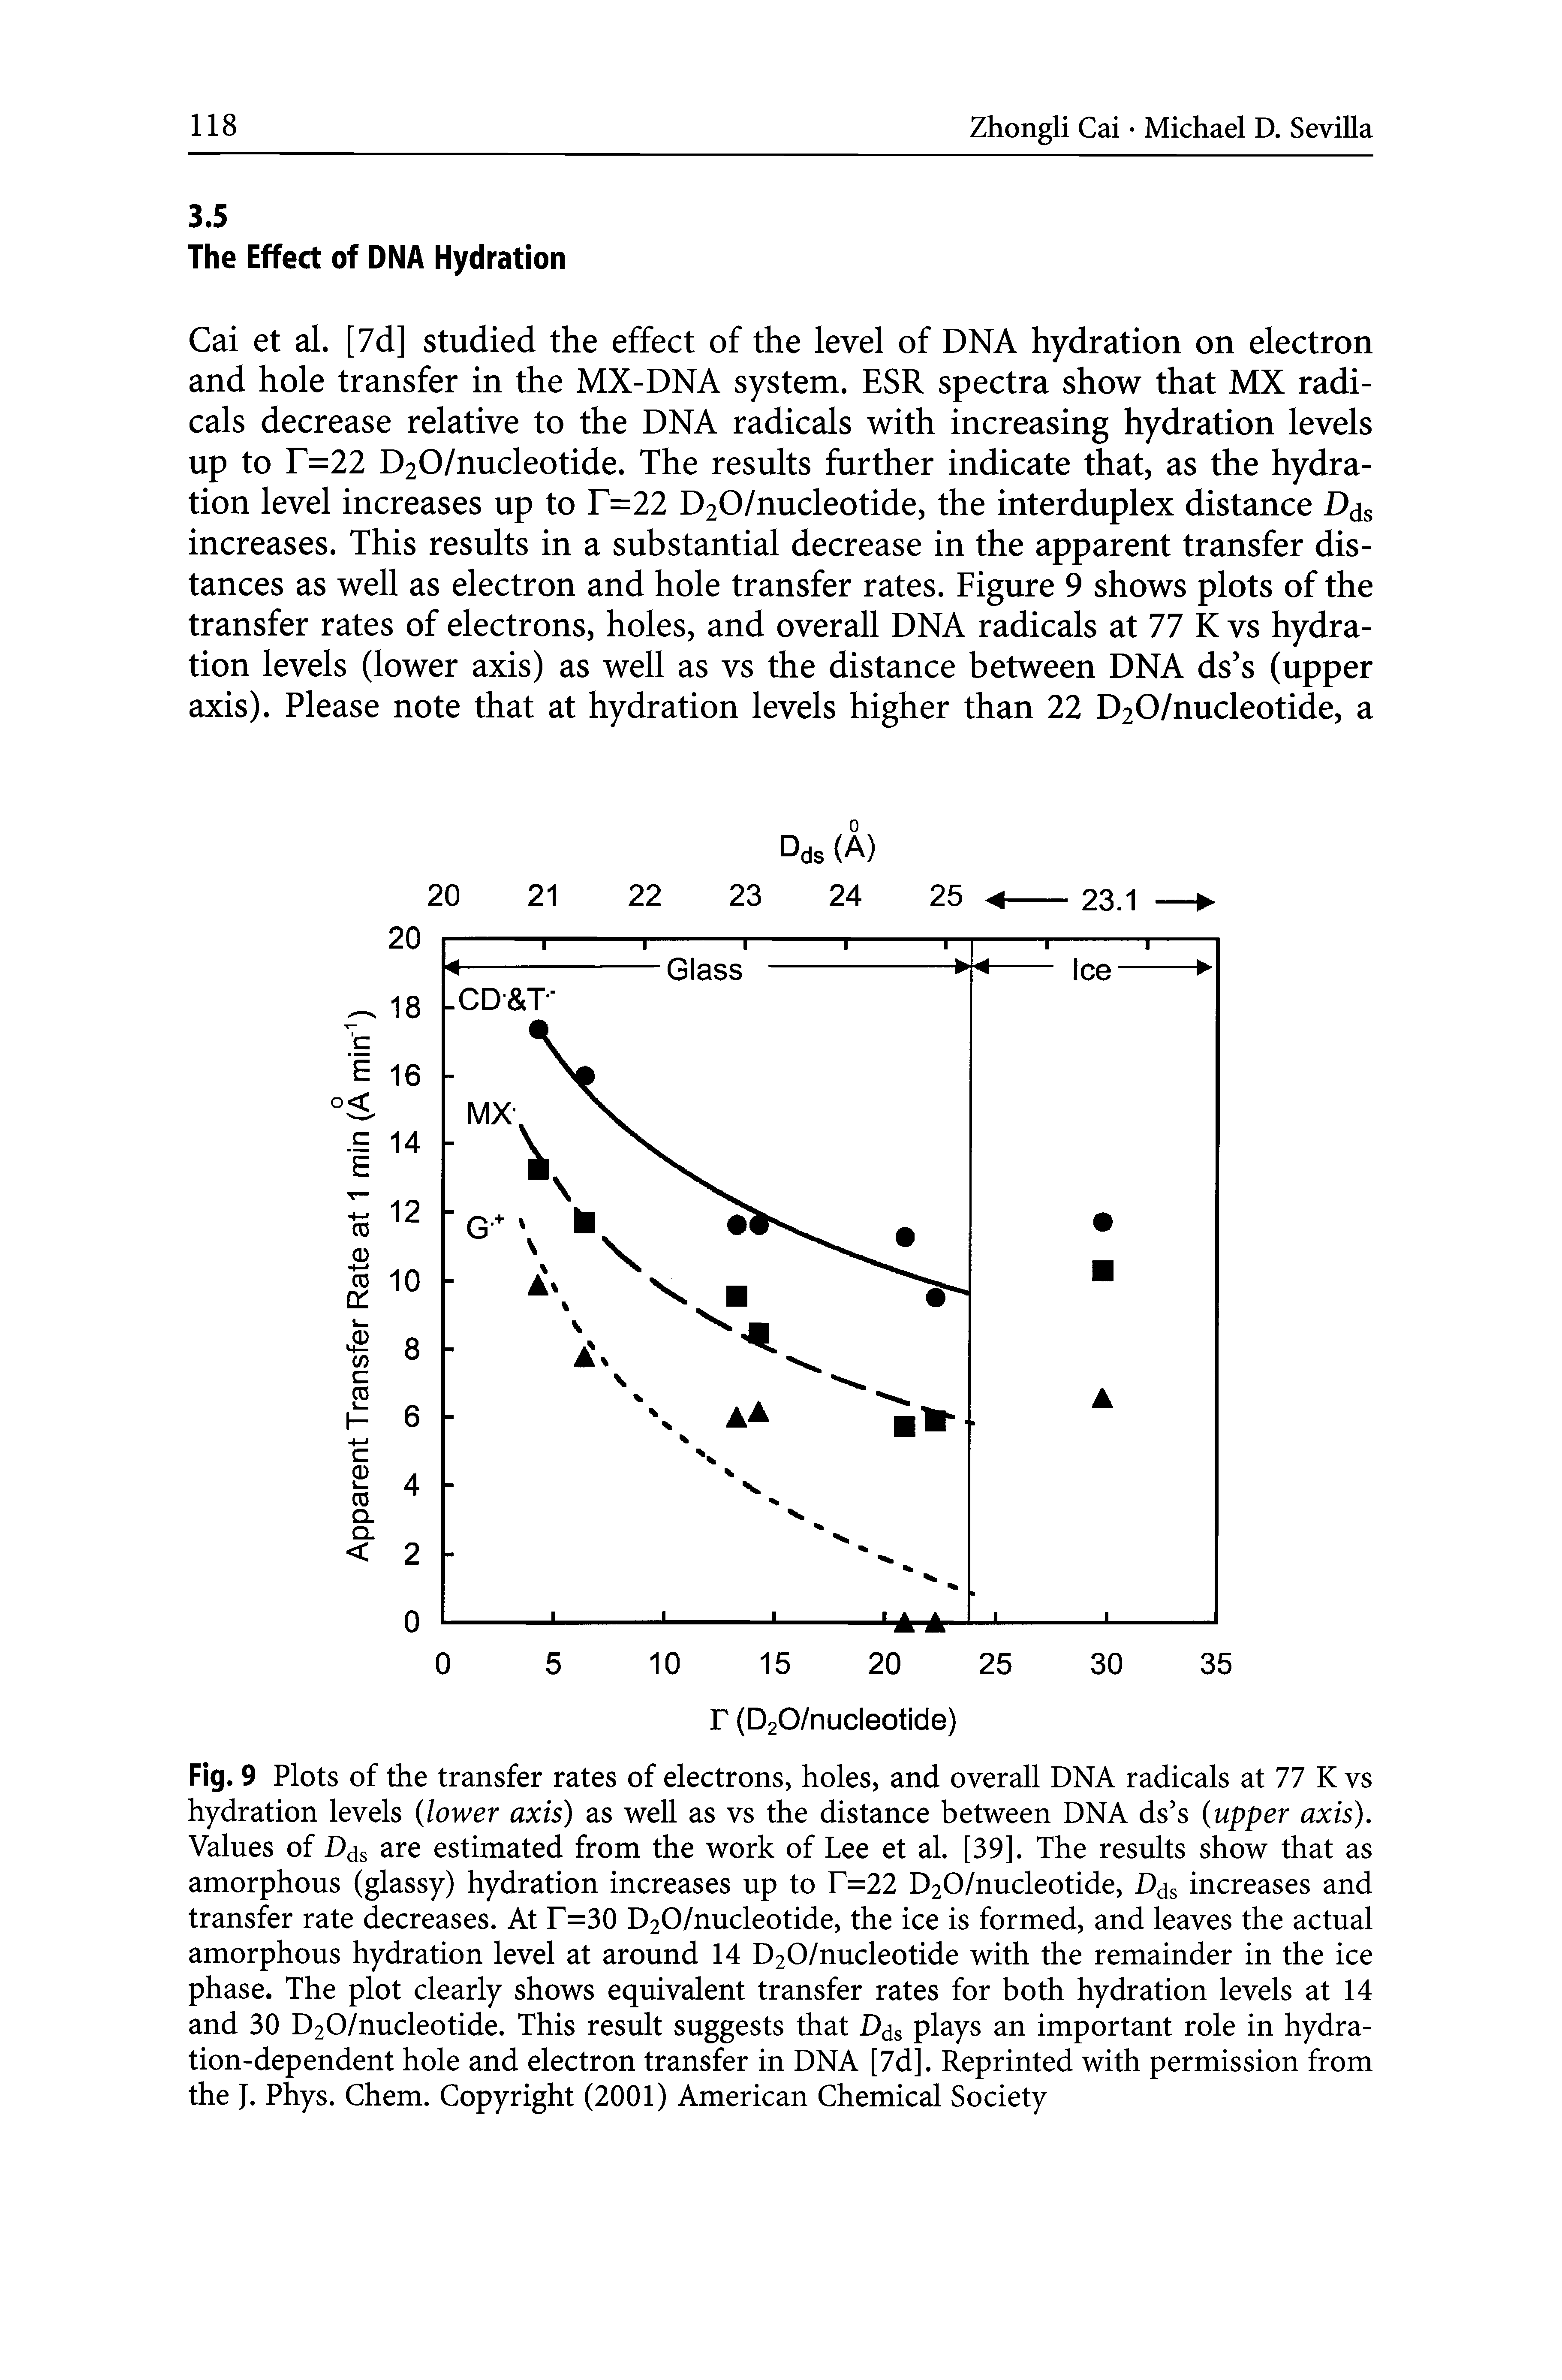 Fig. 9 Plots of the transfer rates of electrons, holes, and overall DNA radicals at 77 K vs hydration levels lower axis) as well as vs the distance between DNA ds s (upper axis). Values of D s are estimated from the work of Lee et al. [39]. The results show that as amorphous (glassy) hydration increases up to T=22 D20/nucleotide, D s increases and transfer rate decreases. At T=30 D20/nucleotide, the ice is formed, and leaves the actual amorphous hydration level at around 14 D20/nucleotide with the remainder in the ice phase. The plot clearly shows equivalent transfer rates for both hydration levels at 14 and 30 D20/nucleotide. This result suggests that Djs plays an important role in hydration-dependent hole and electron transfer in DNA [7dj. Reprinted with permission from the J. Phys. Chem. Copyright (2001) American Chemical Society...